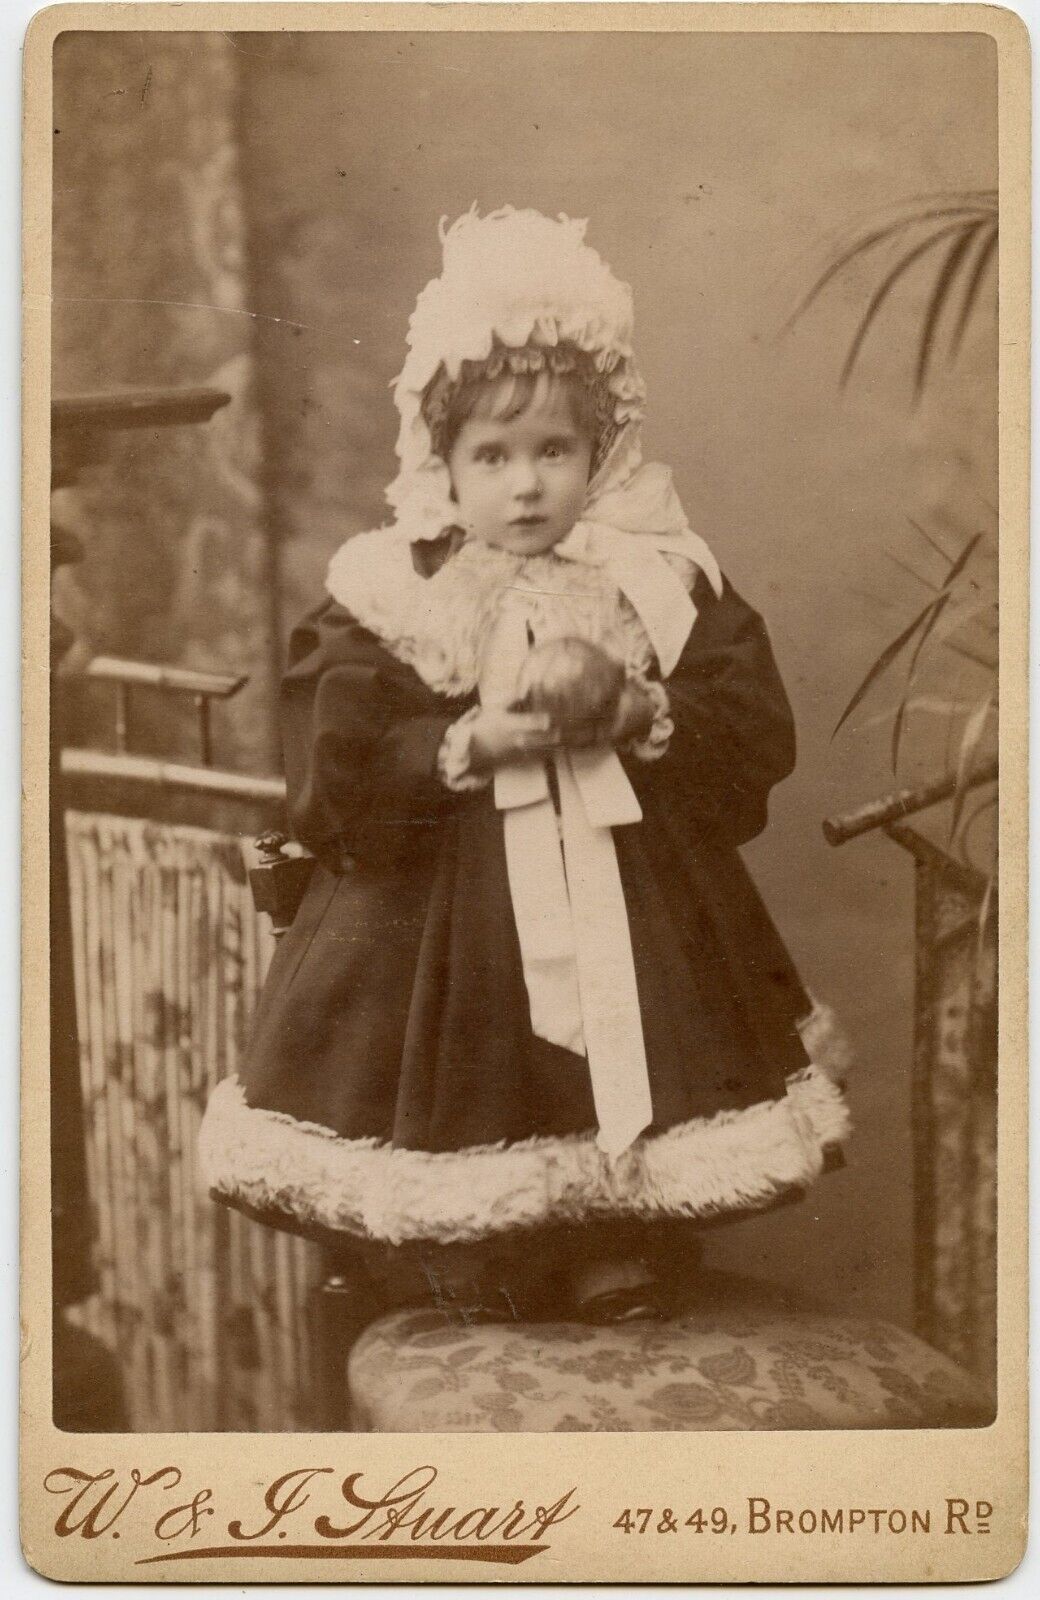 Girl - Dorothy M. Collins with Toy ? Vintage Children Photo by Stuart, London UK